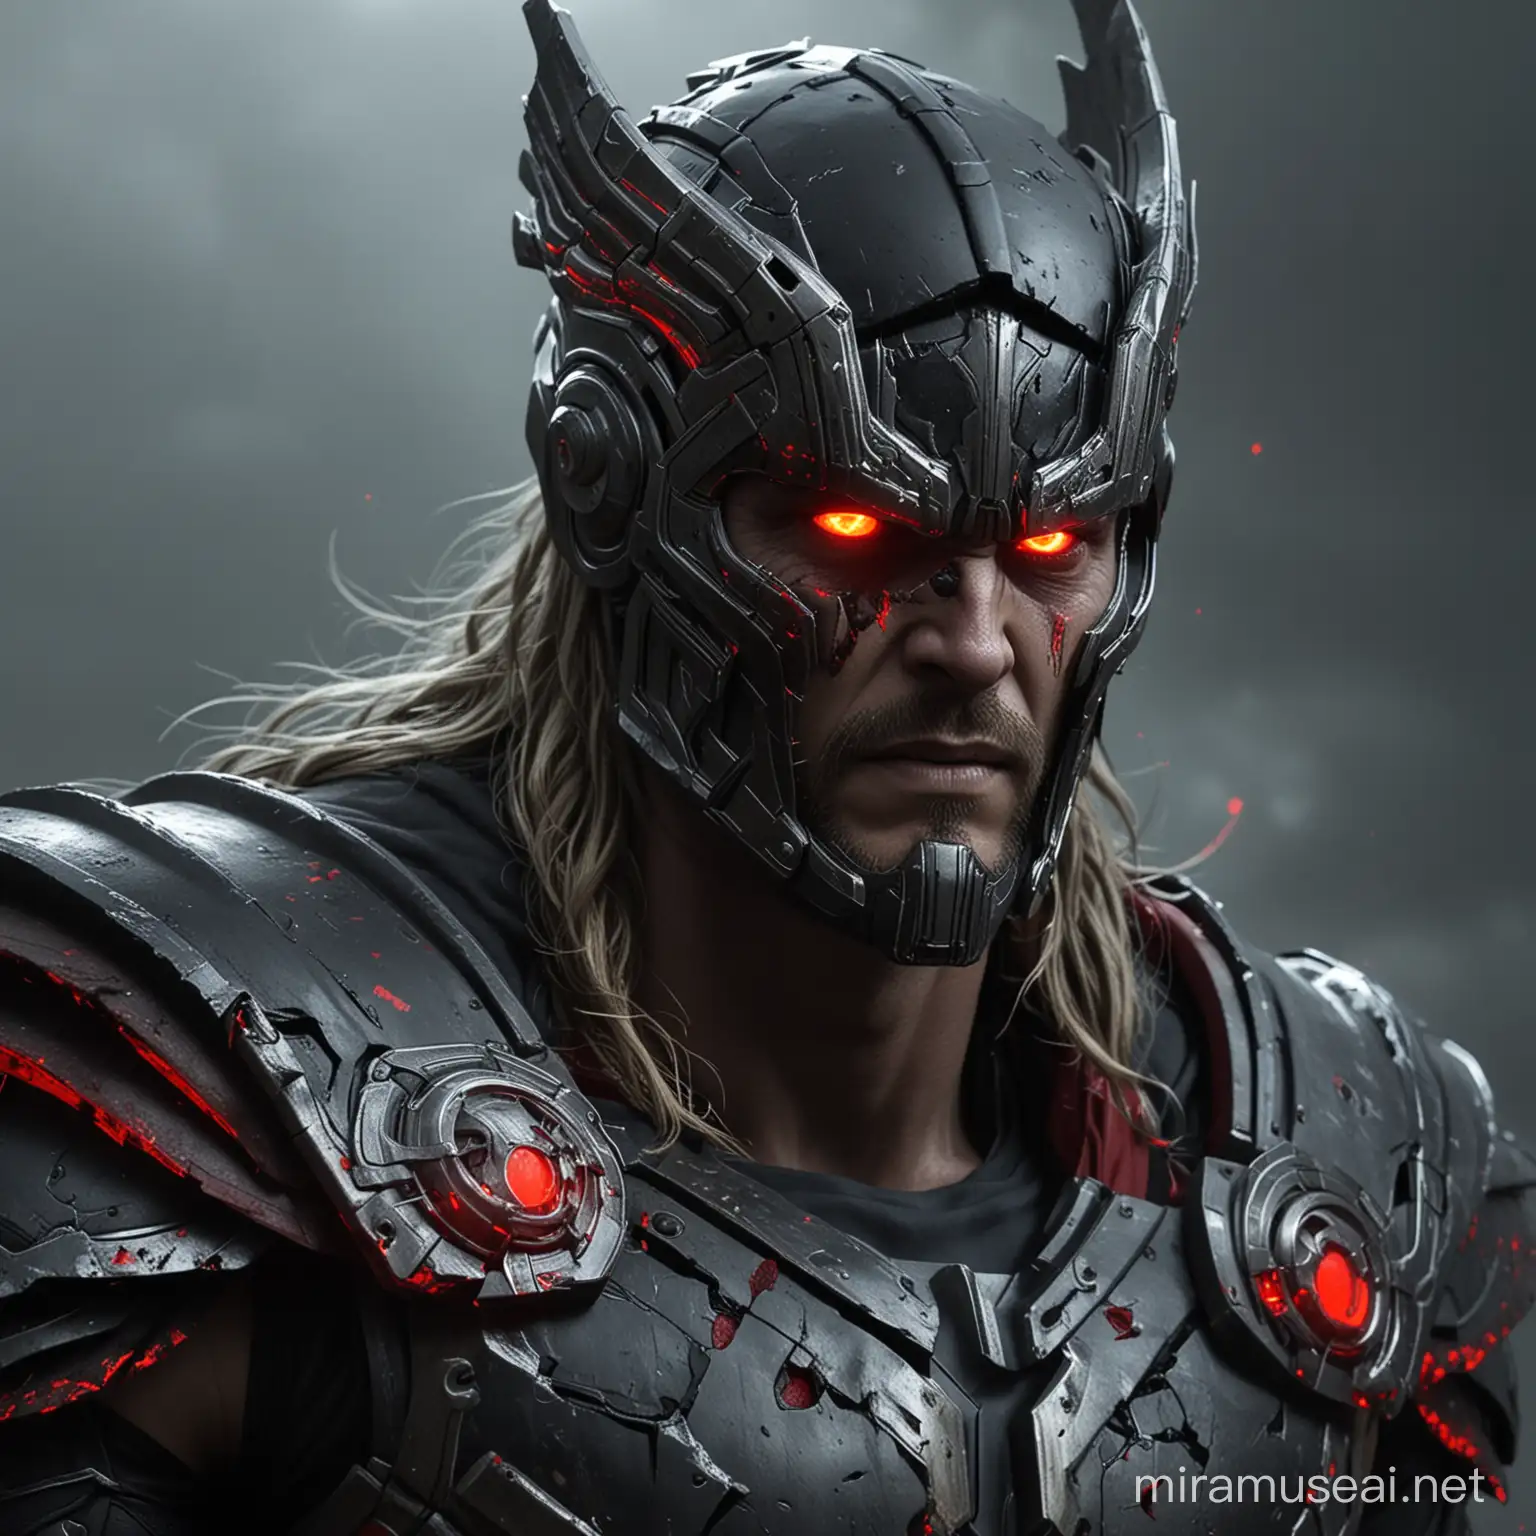 Sinister Thor in Dark Armor with Glowing Red Eyes